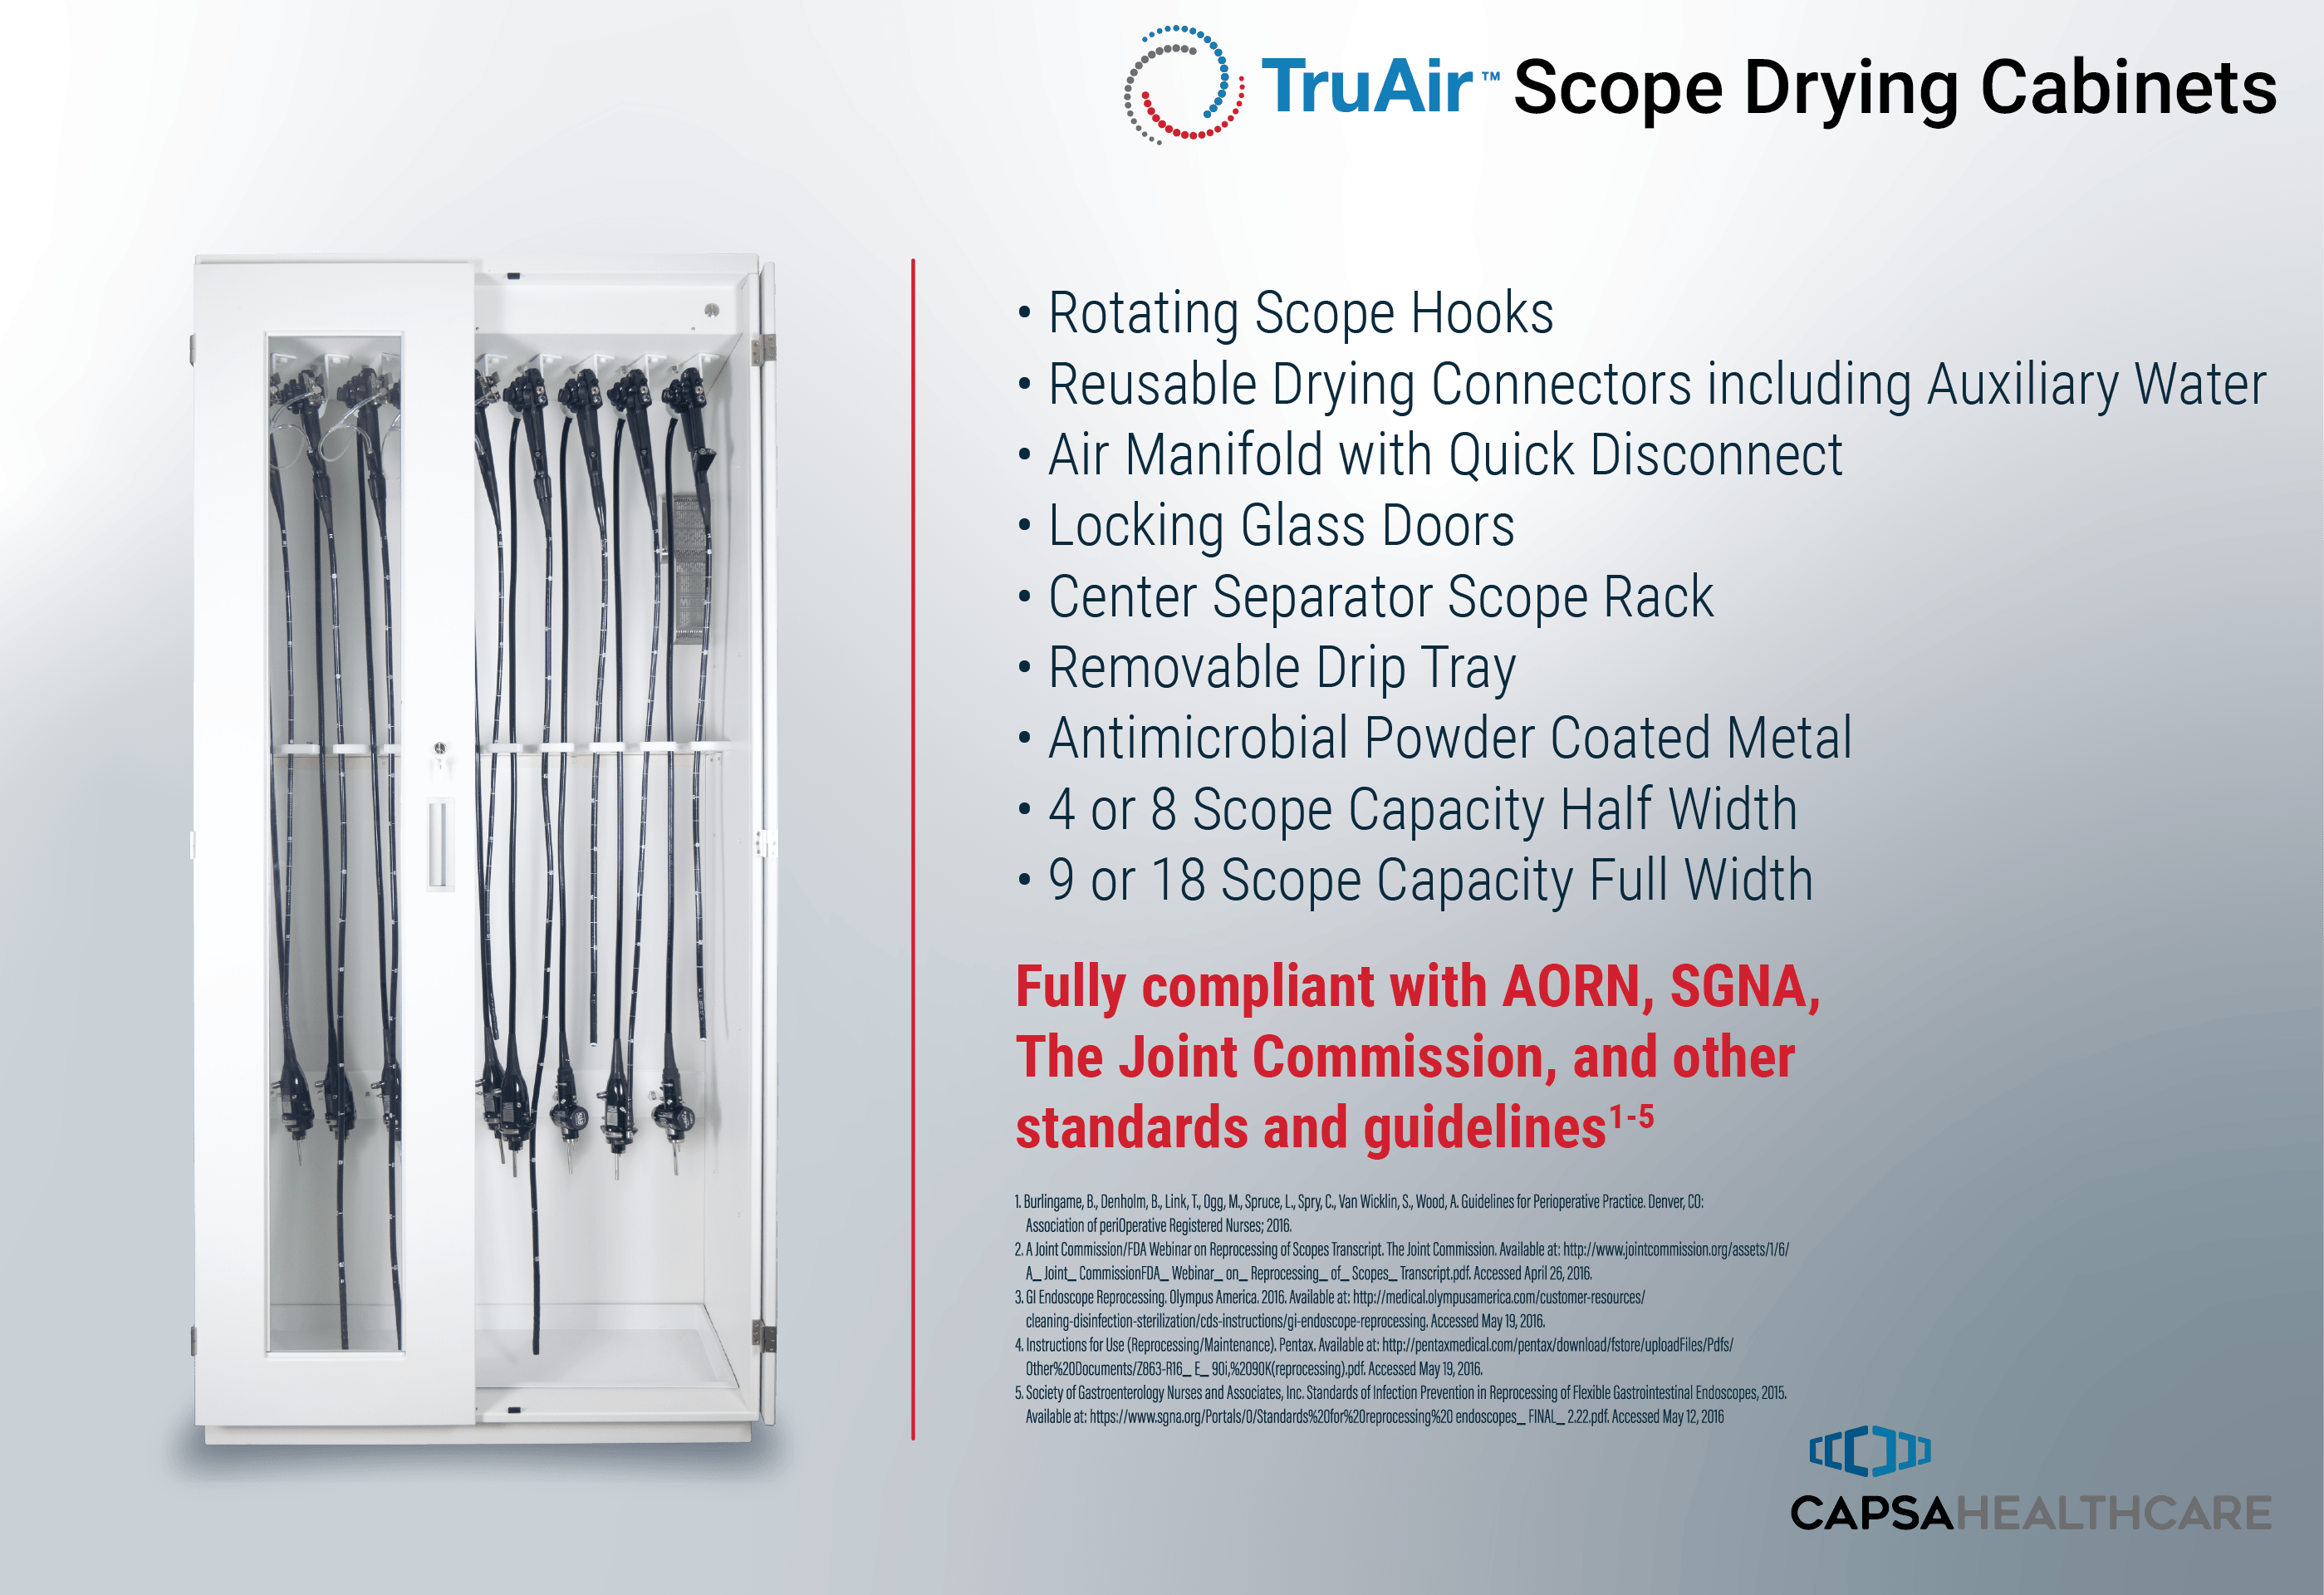 TruAir Scope Drying Cabinet - Overview